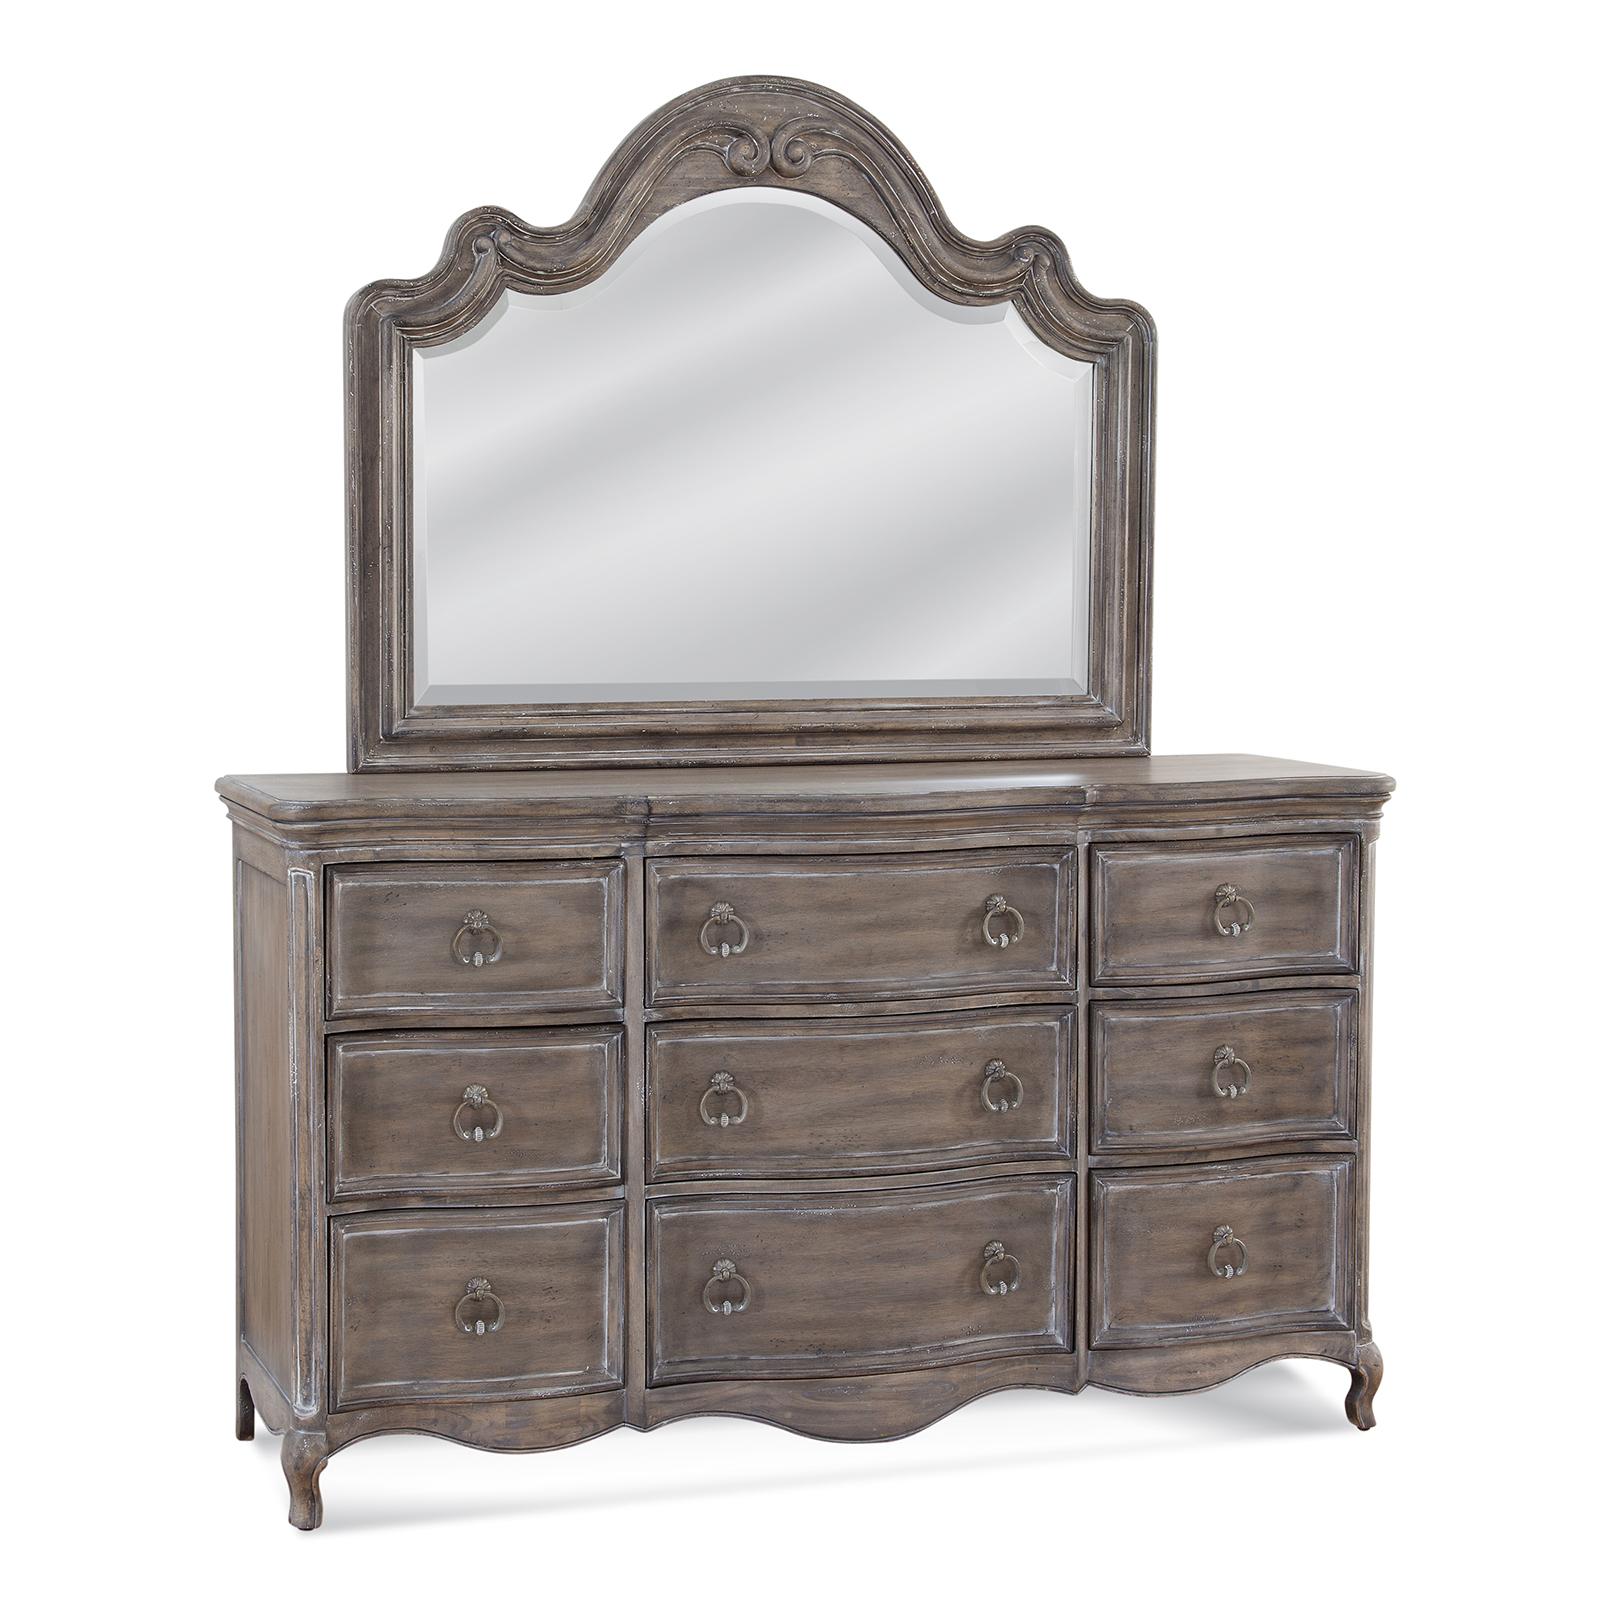 American Woodcrafters 1575-TDLM Dresser With Mirror